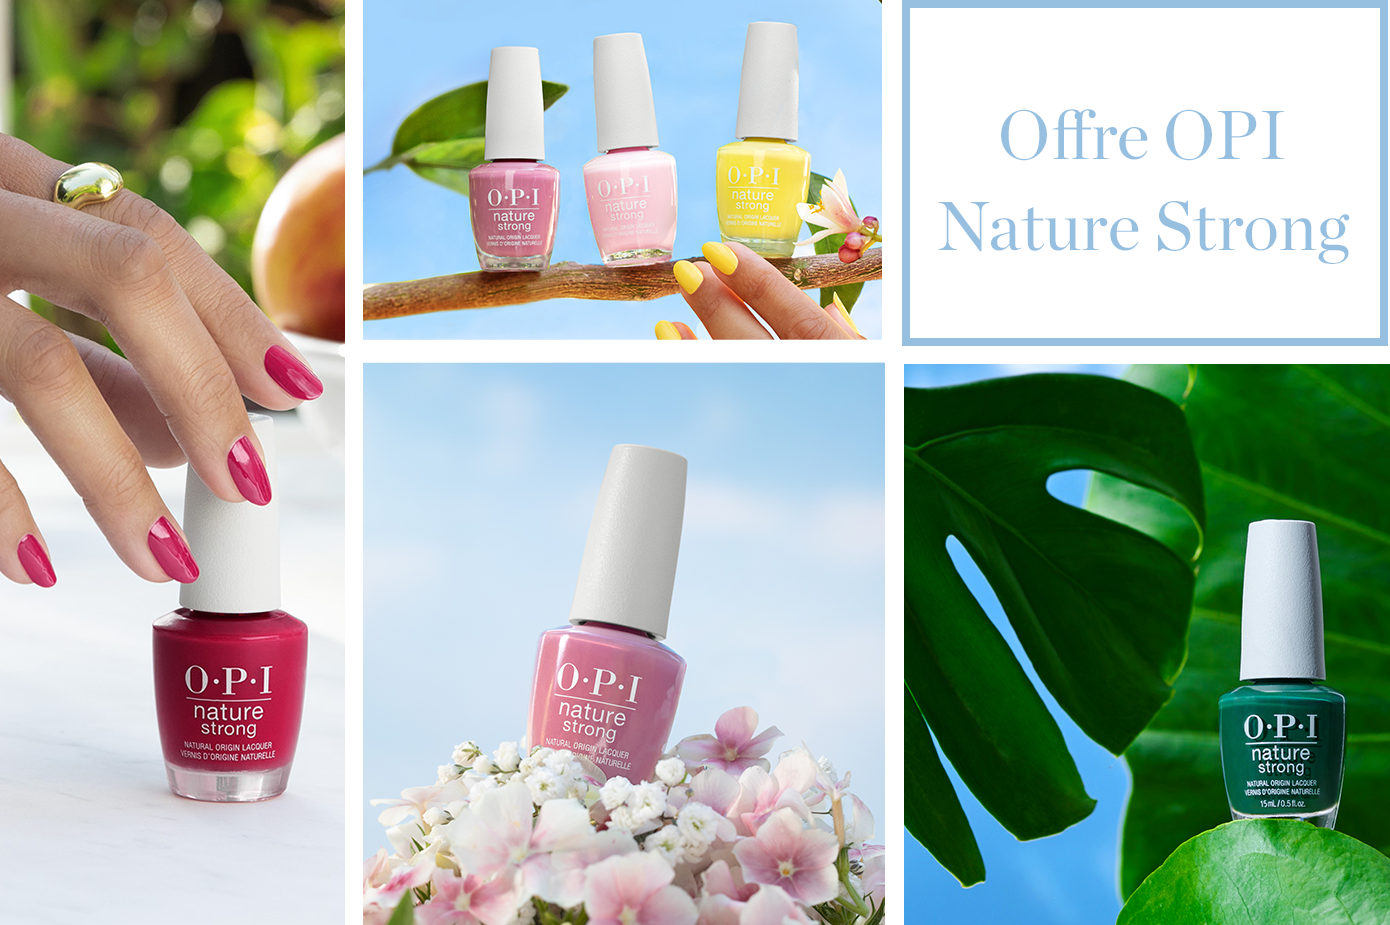 PROMO OPI NATURE STRONG